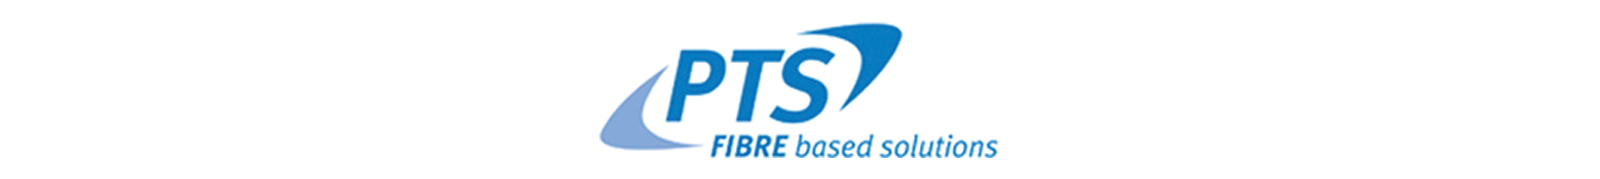 PTS fibre based solutions